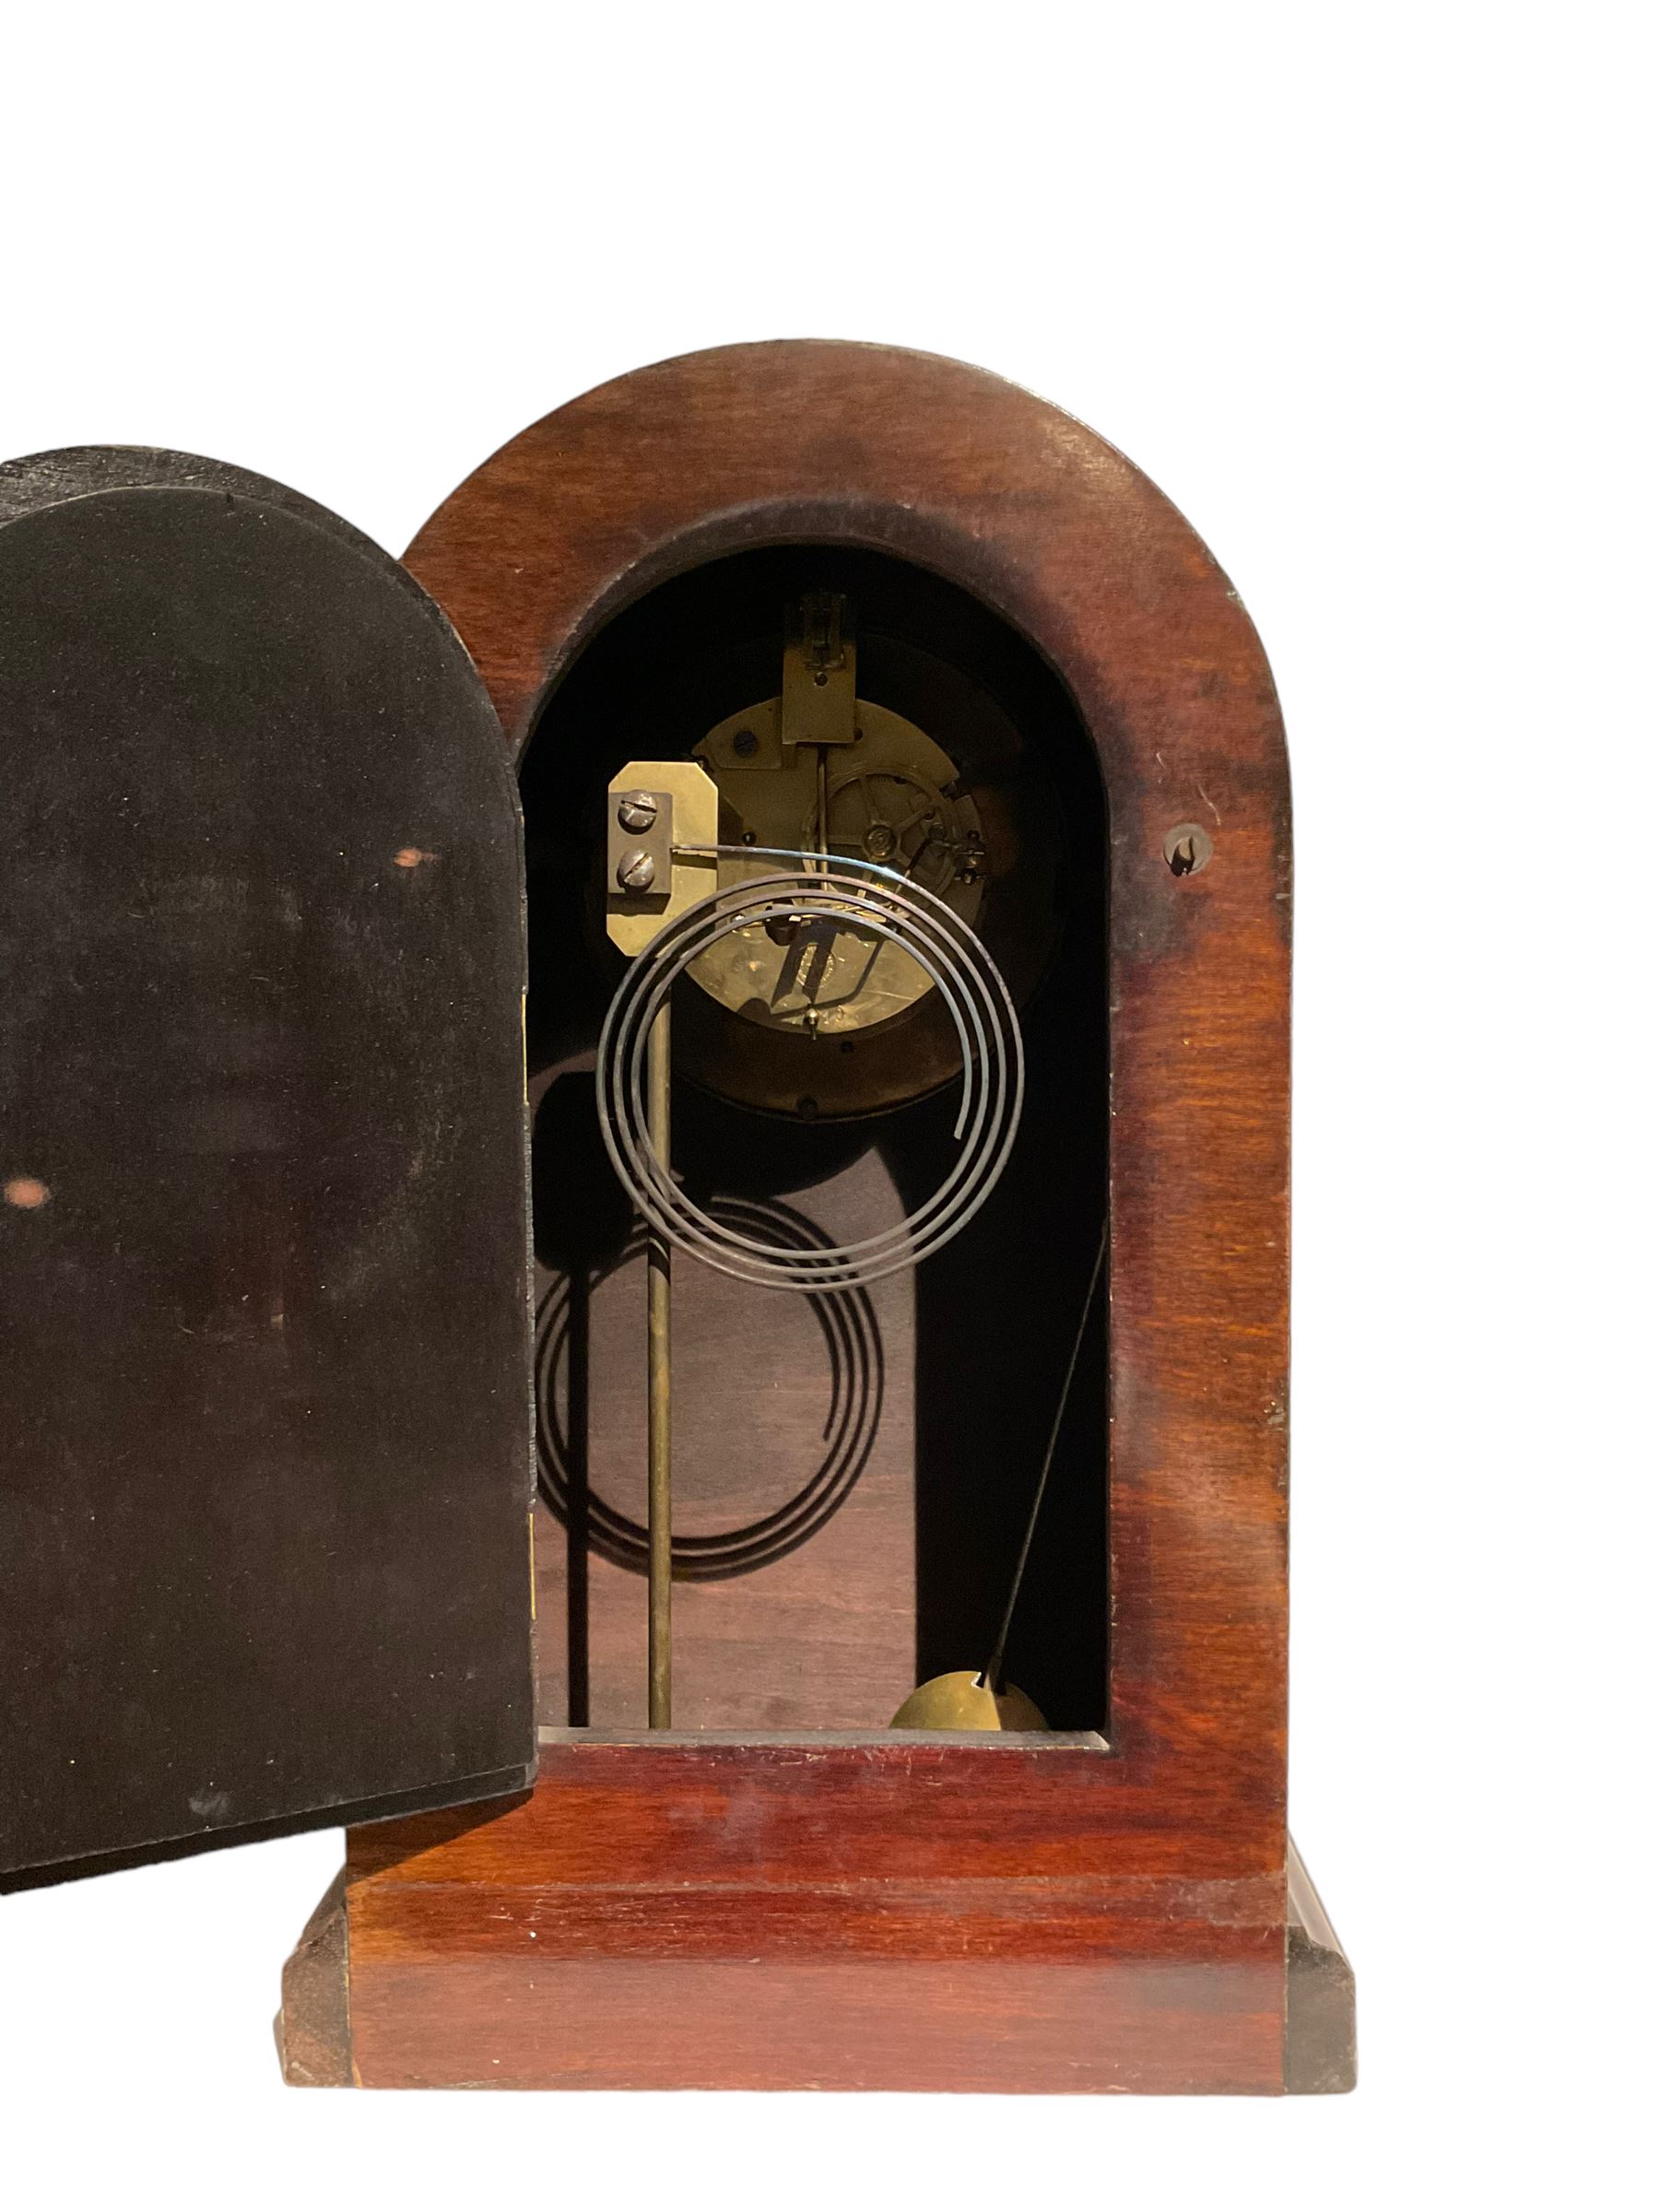 French - 19th-century 8-day mantle clock in a mahogany case - Image 2 of 6